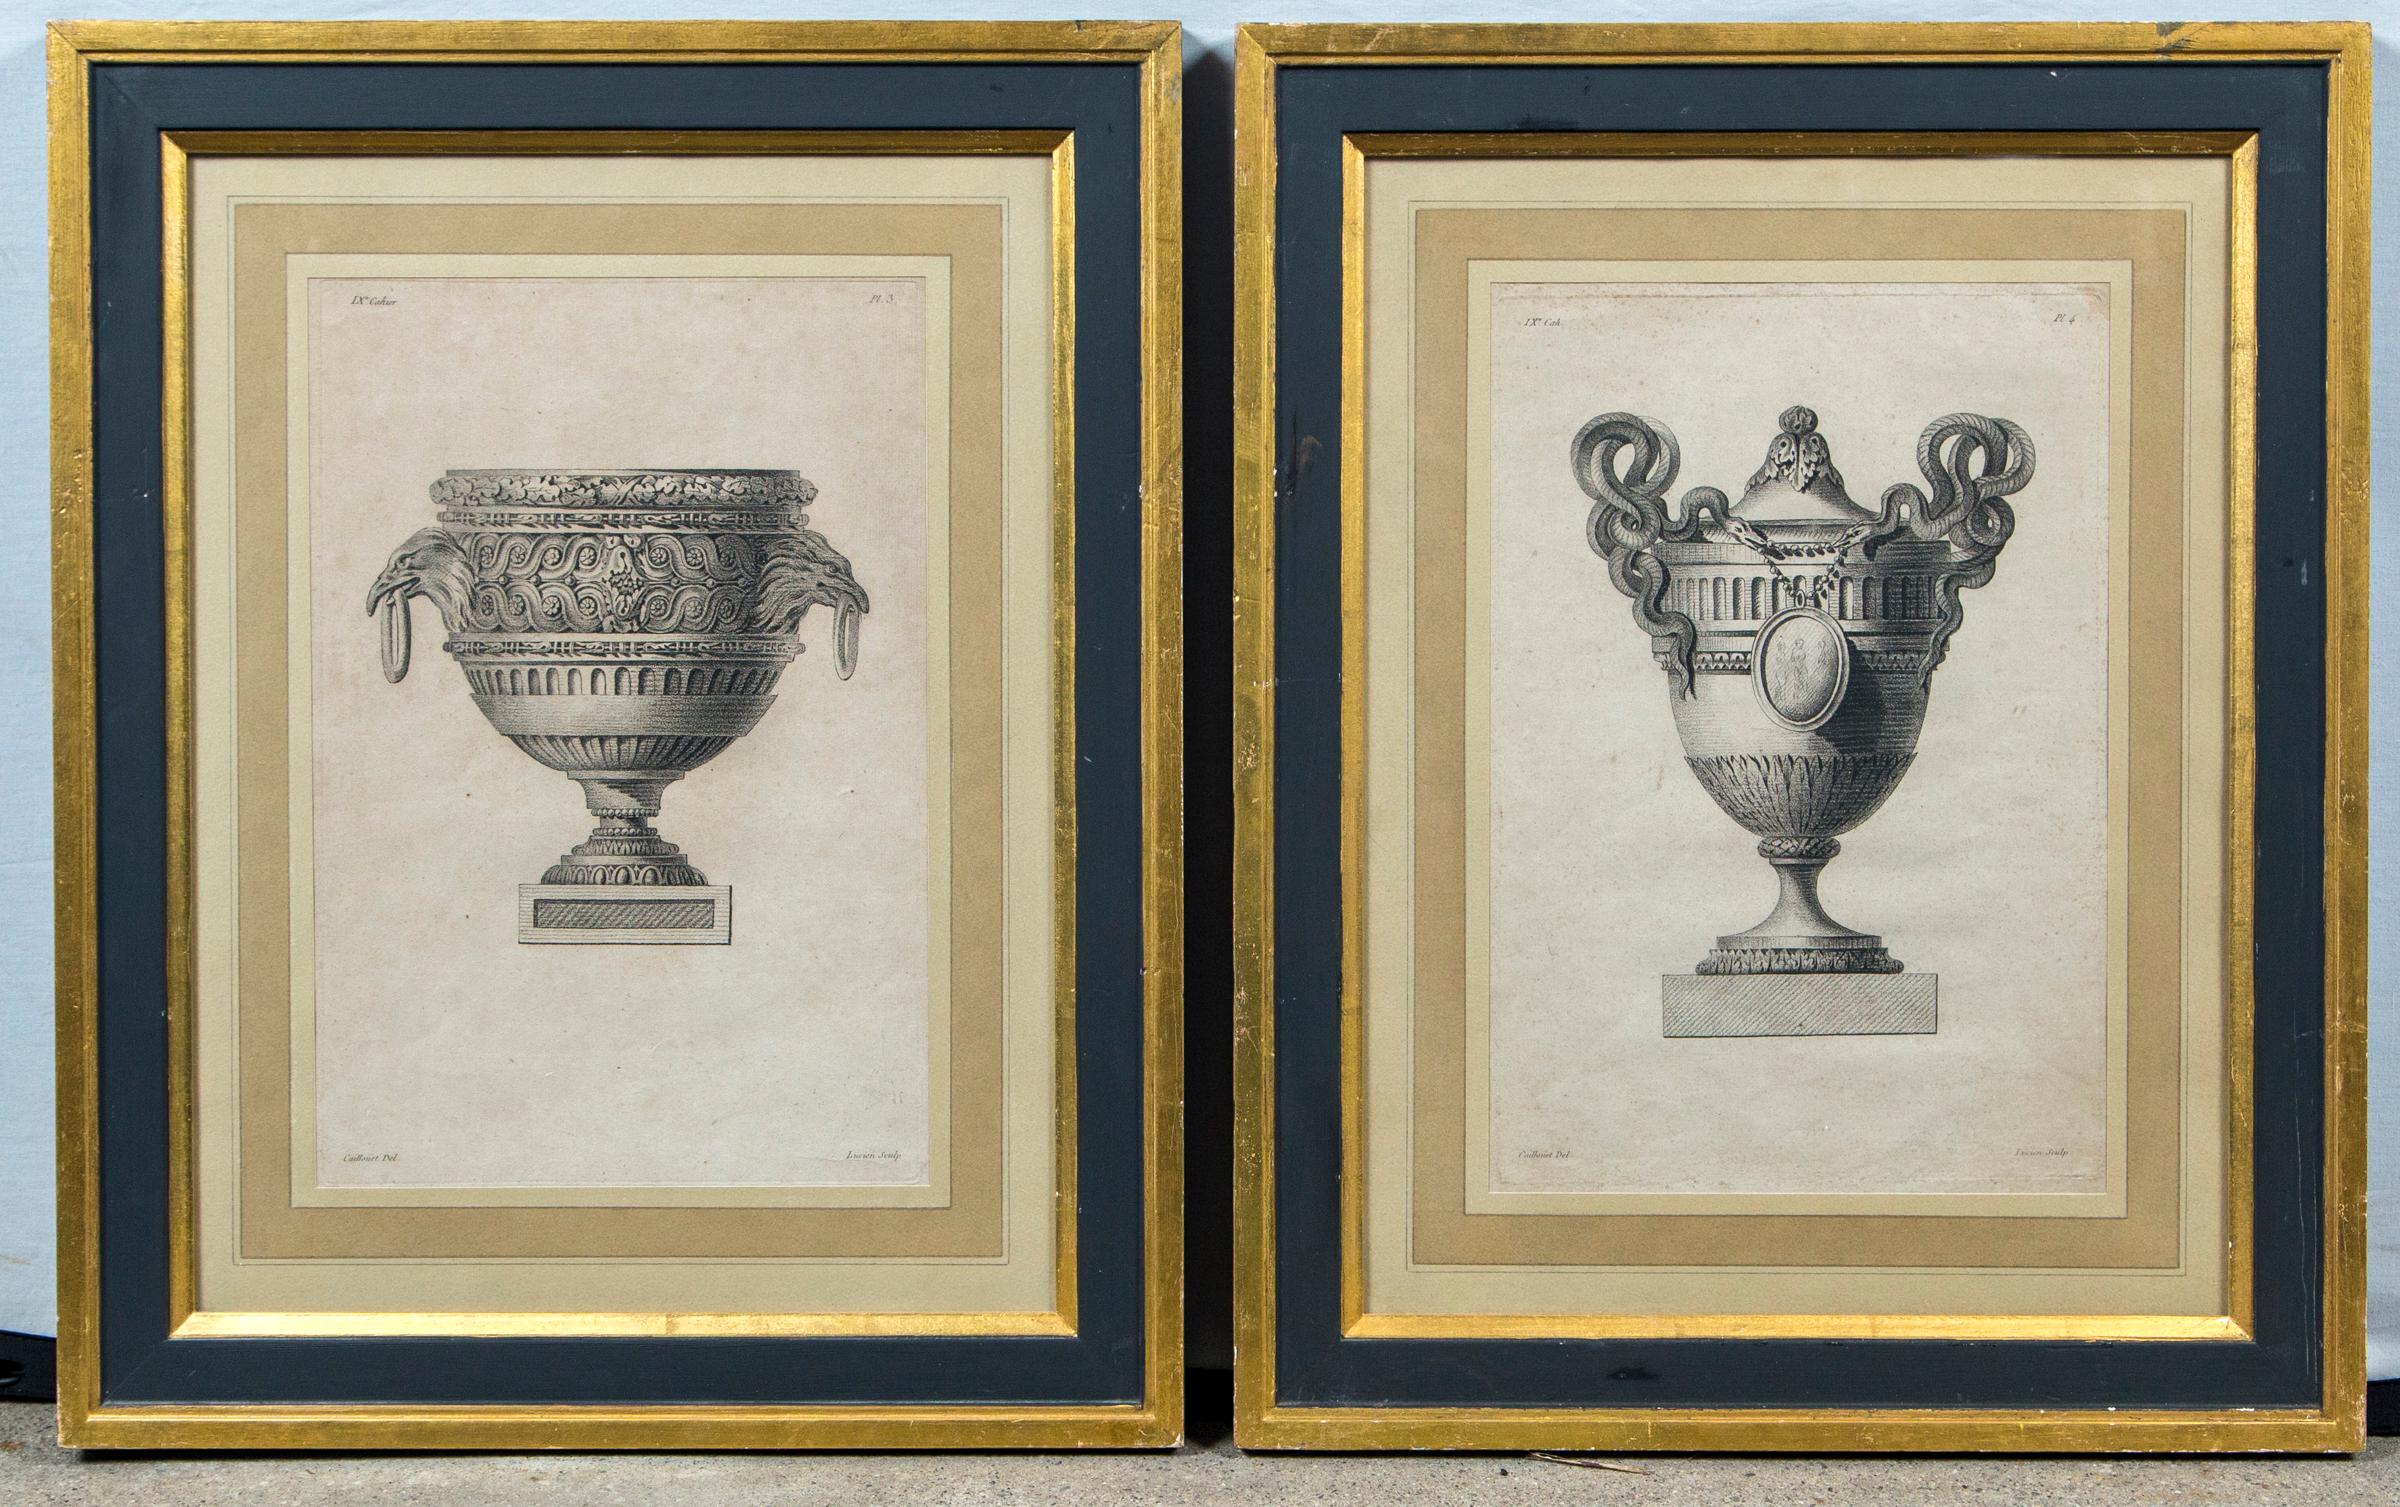 Set of 4 framed vase engravings by Andre-Louis Caillouet (1778-1817), France, late 18th century. Each engraving depicts a different style of ornamental vase, from the series, 